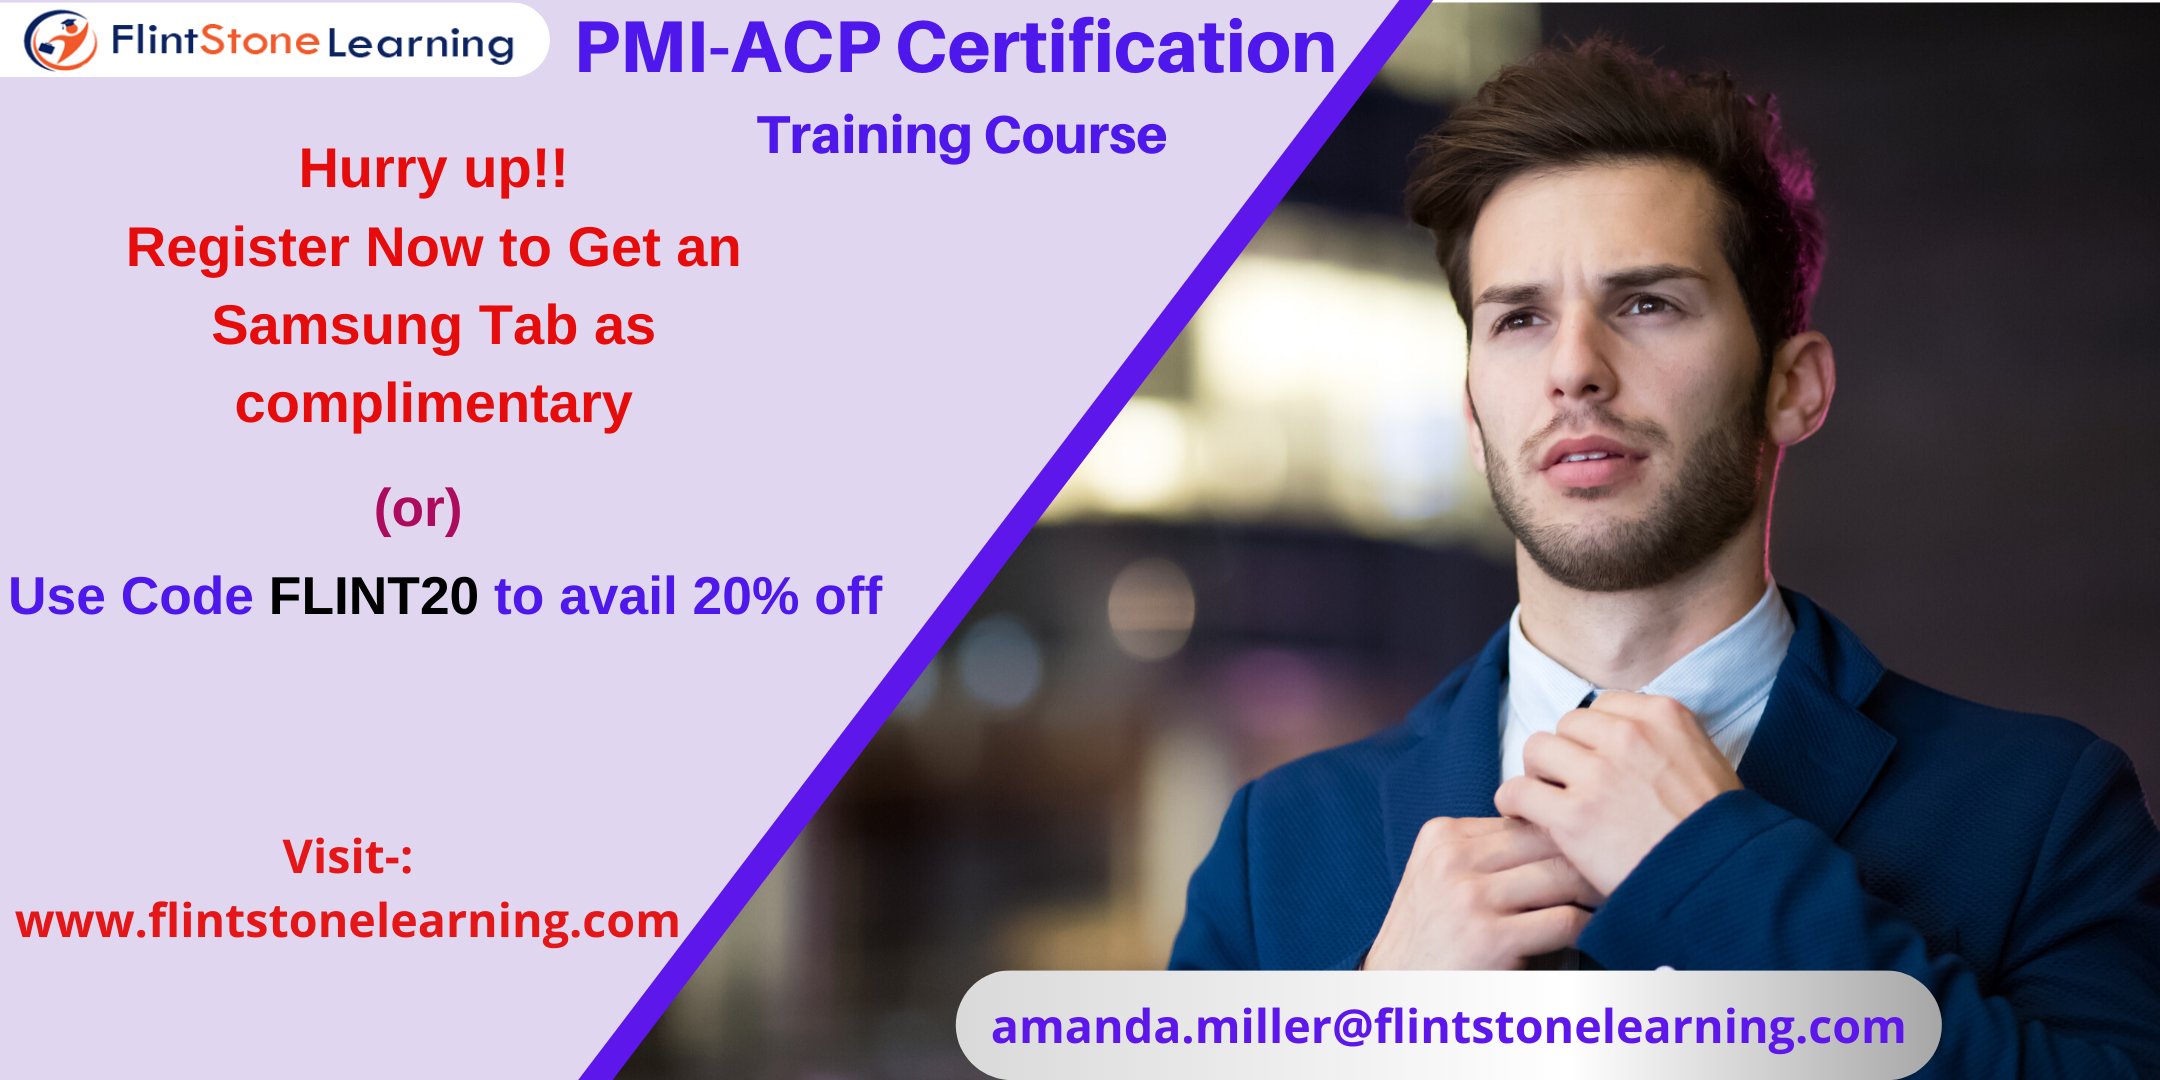 PMI-ACP Certification Training Course in Bel Air, CA